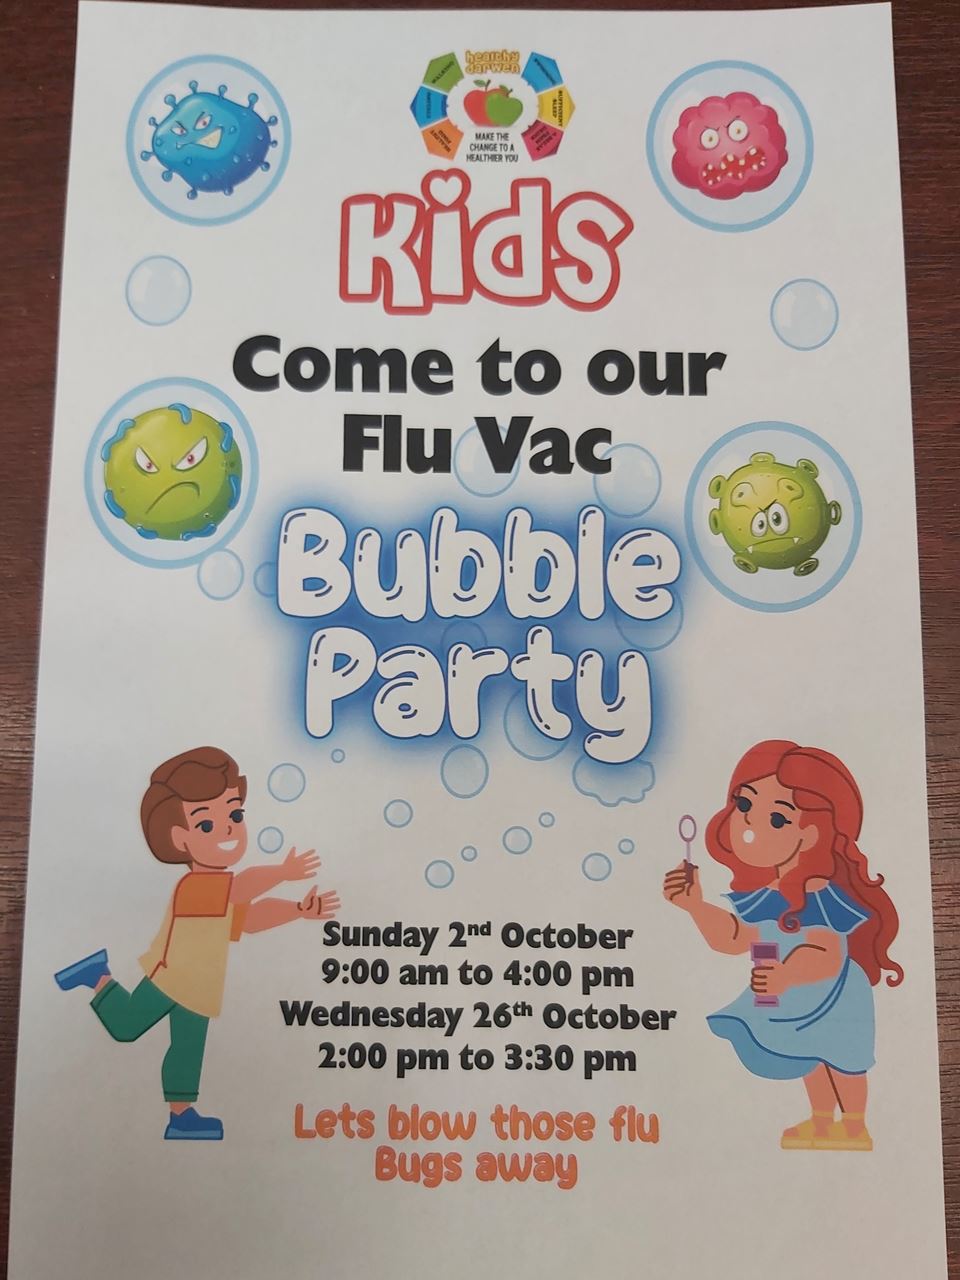 Bubble Party - Nasal Flu Vaccines